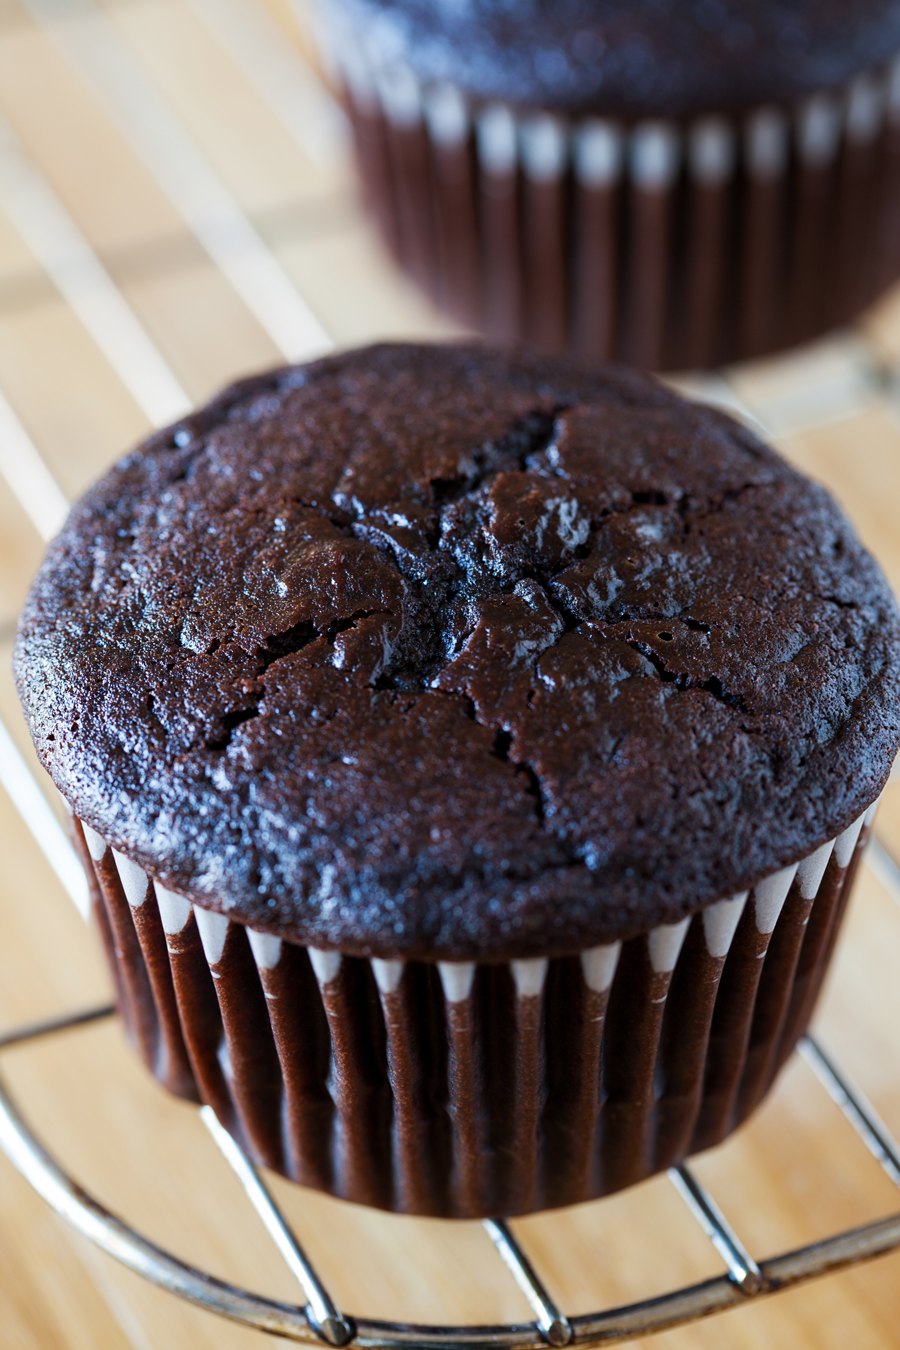 Unfrosted chocolate cupcake